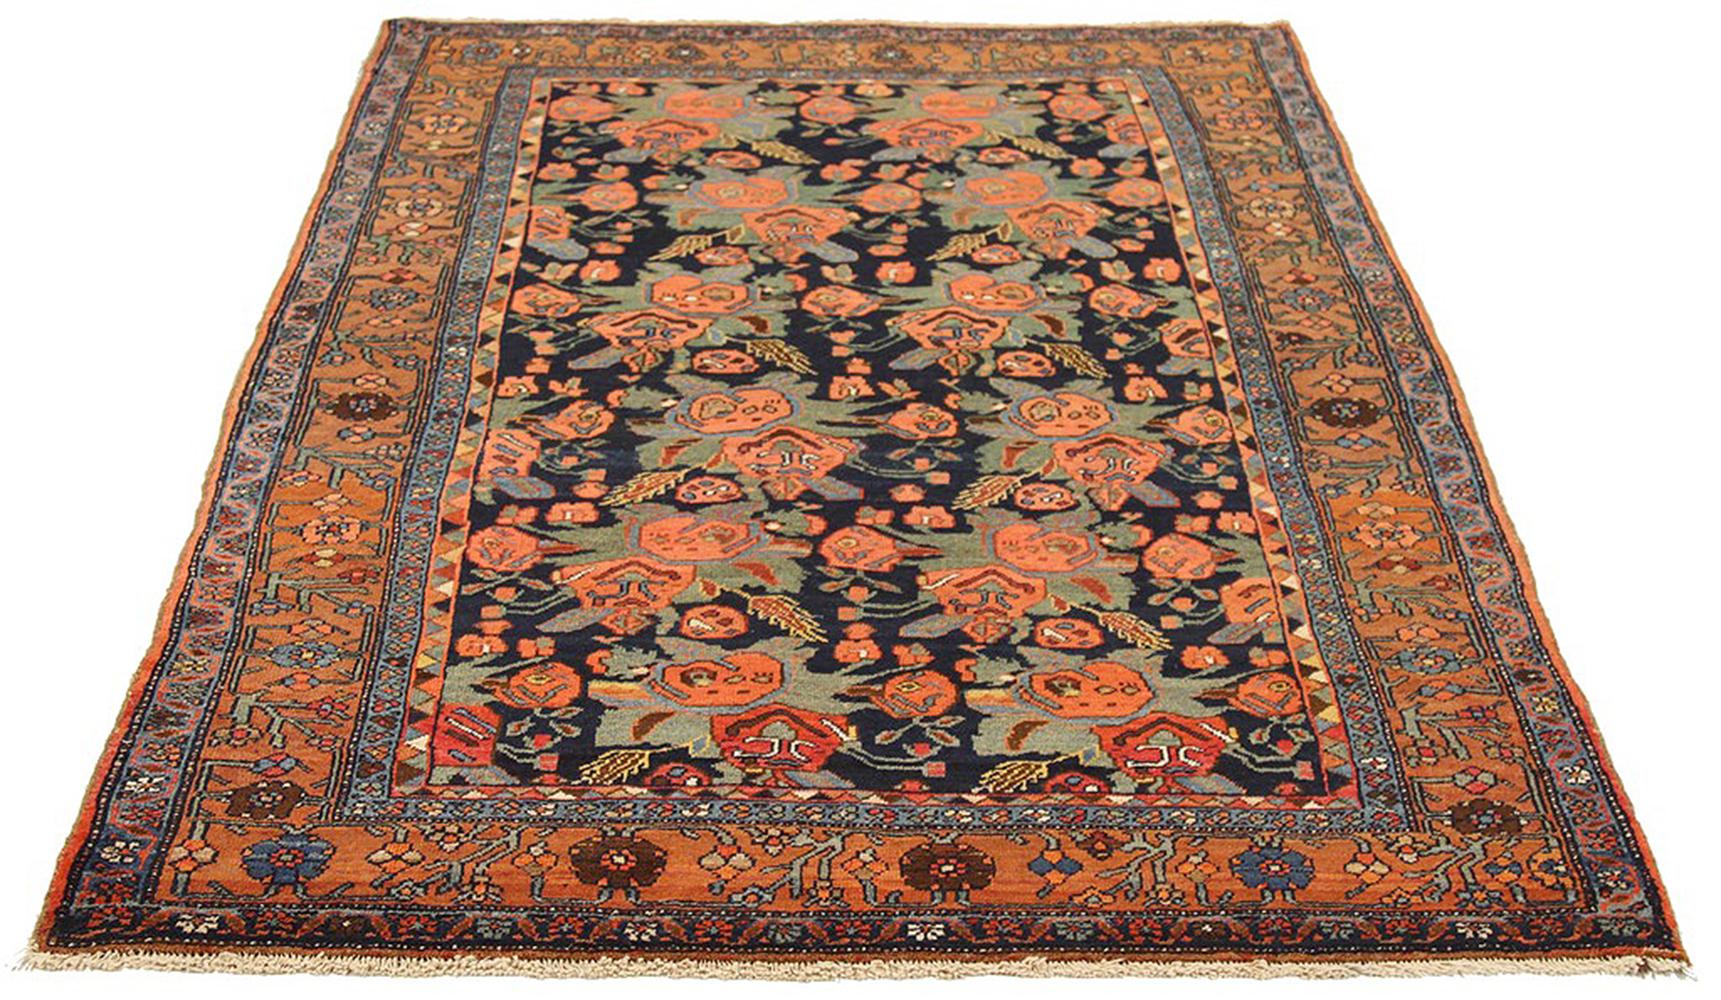 Antique Persian rug handwoven from the finest sheep’s wool and colored with all-natural vegetable dyes that are safe for humans and pets. It’s a traditional Bijar design featuring floral details in pink and green over a black field. It’s a stunning